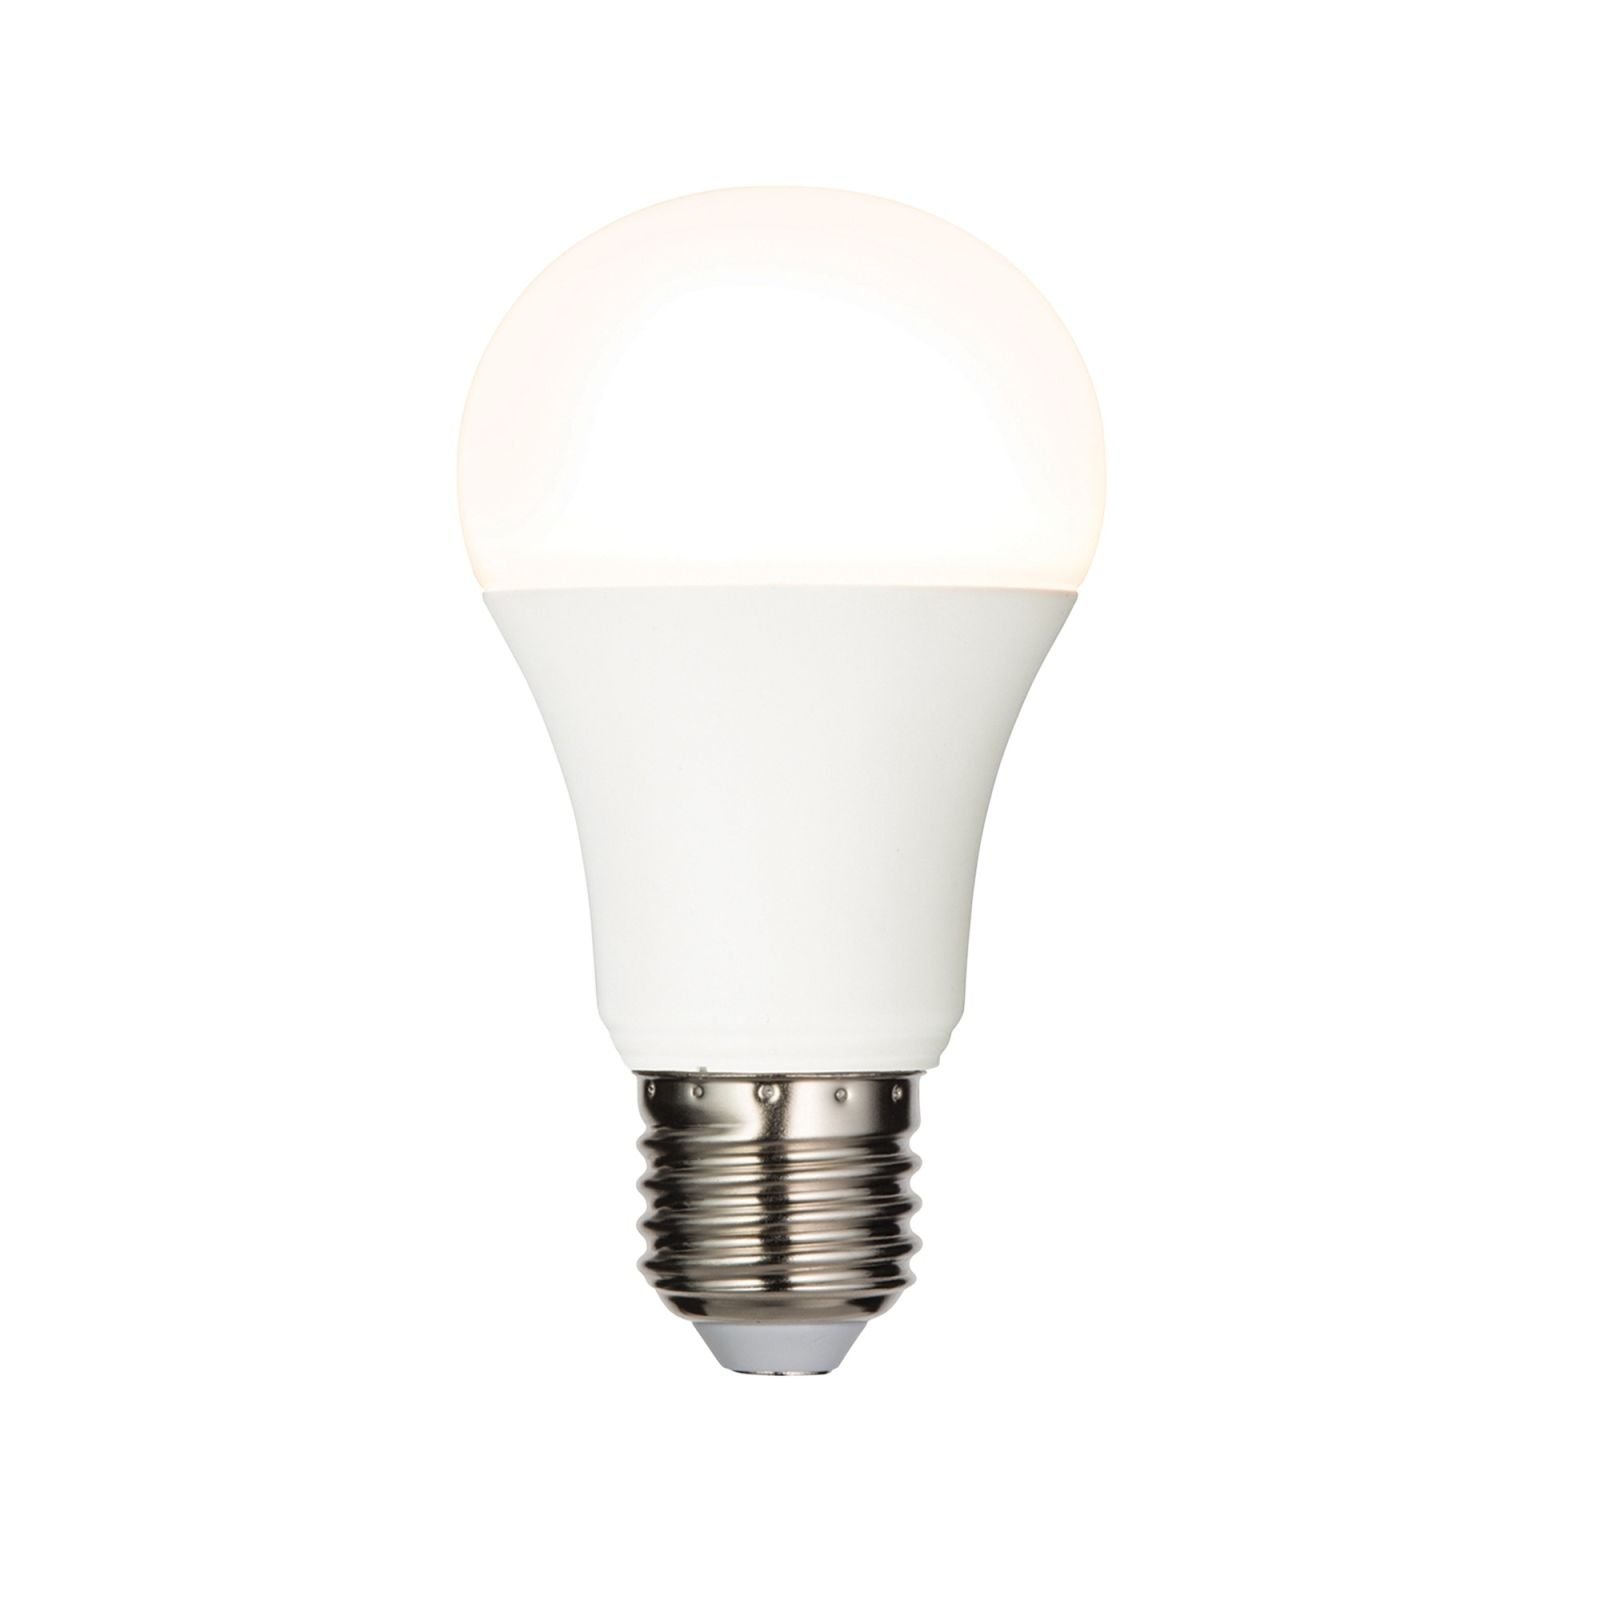 E27 LED GLS dimmable 10W warm white